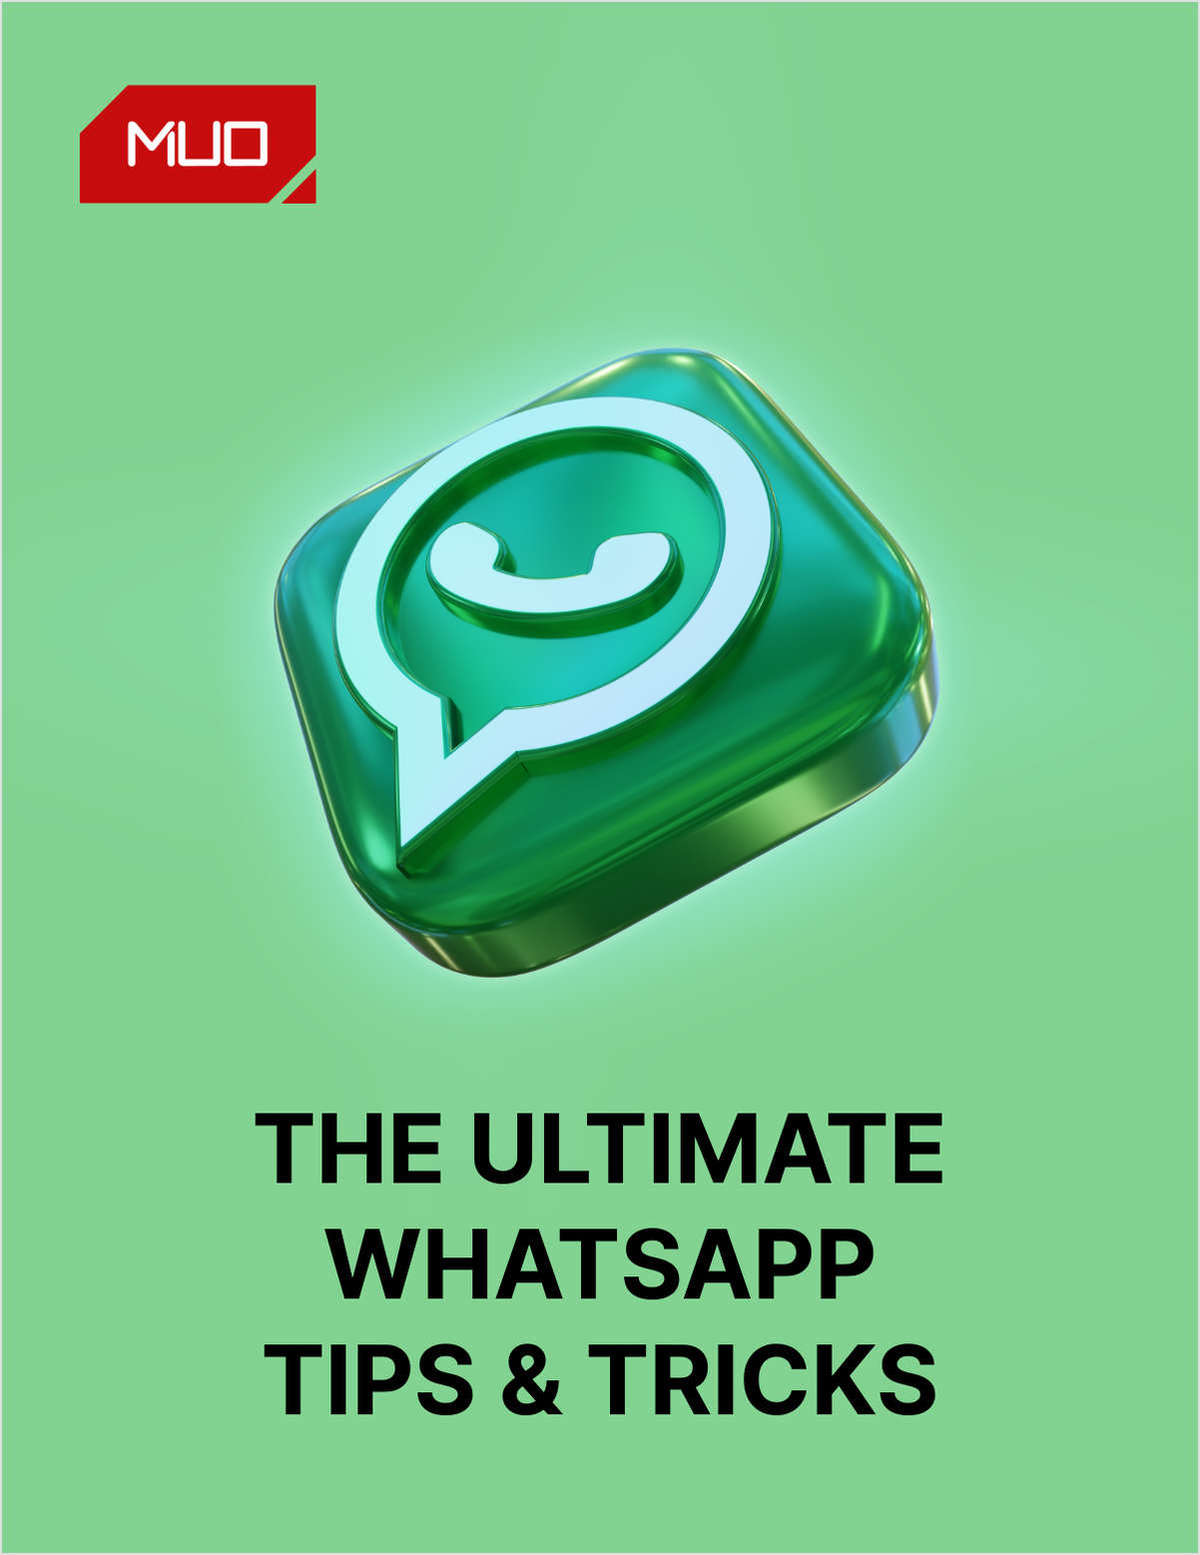 WhatsApp Tips and Tricks for Android and iOS (Free Cheat Sheet)